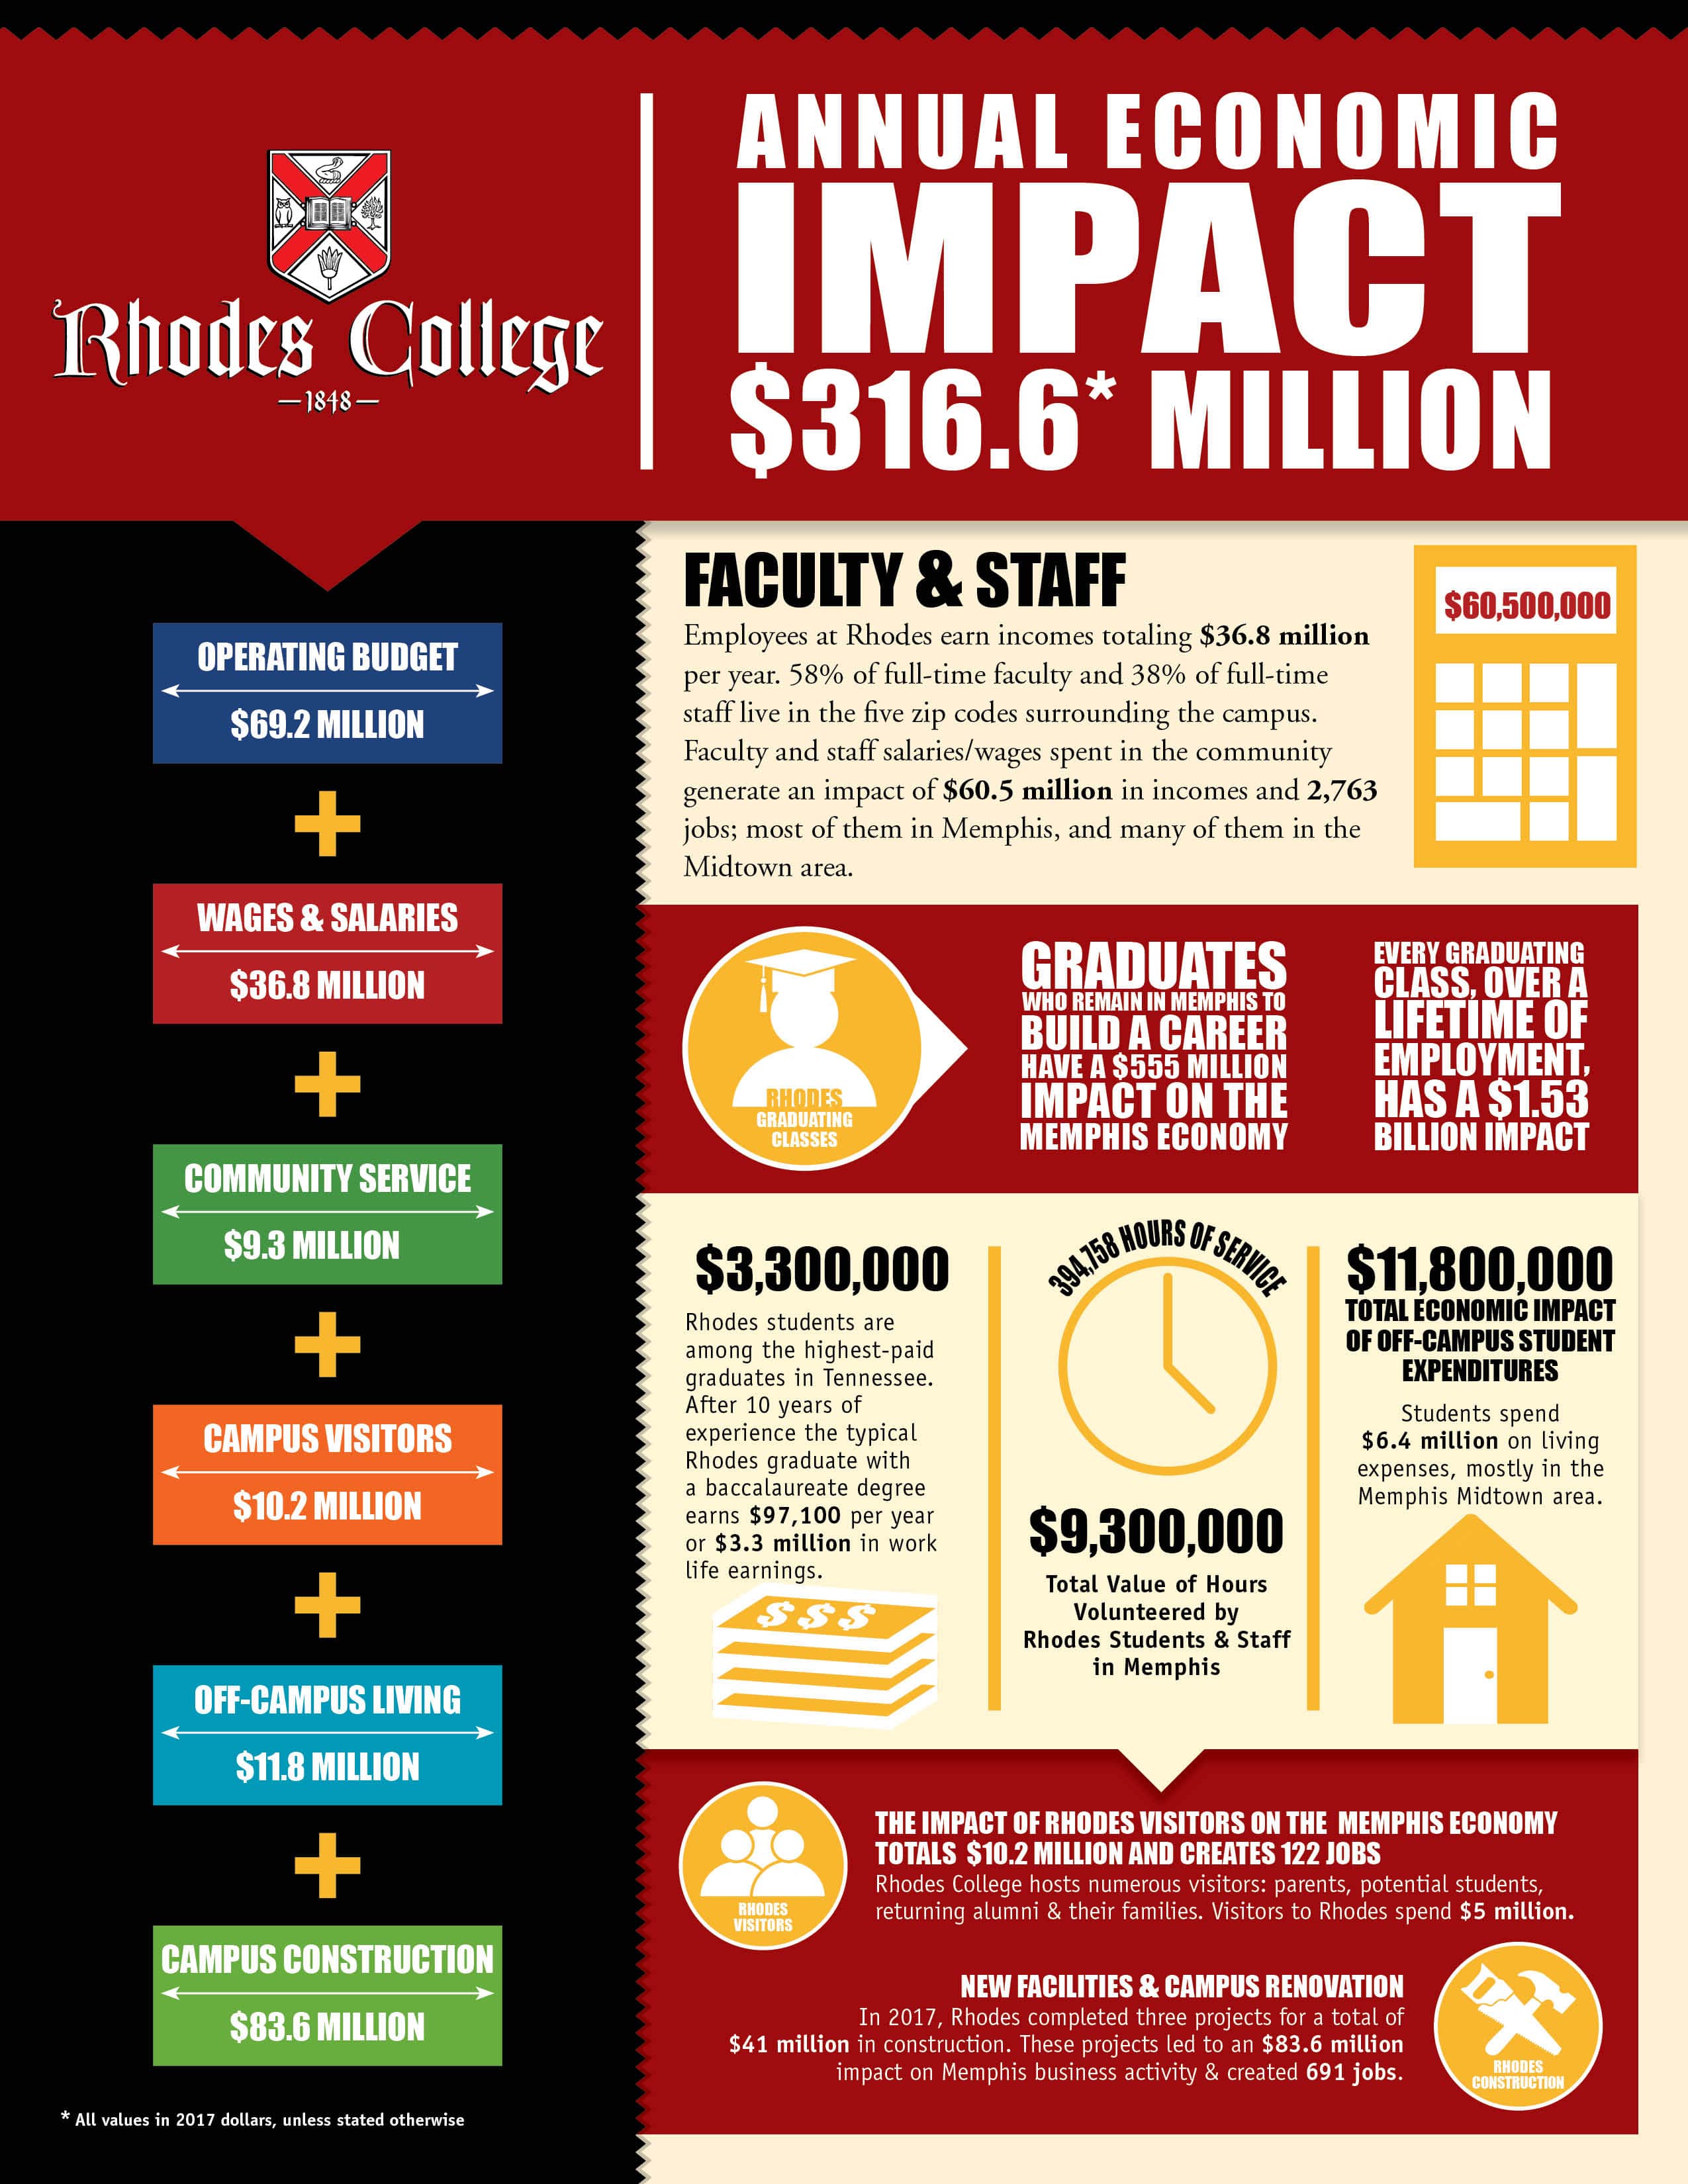 A graphic outlining the economic impact of Rhodes College